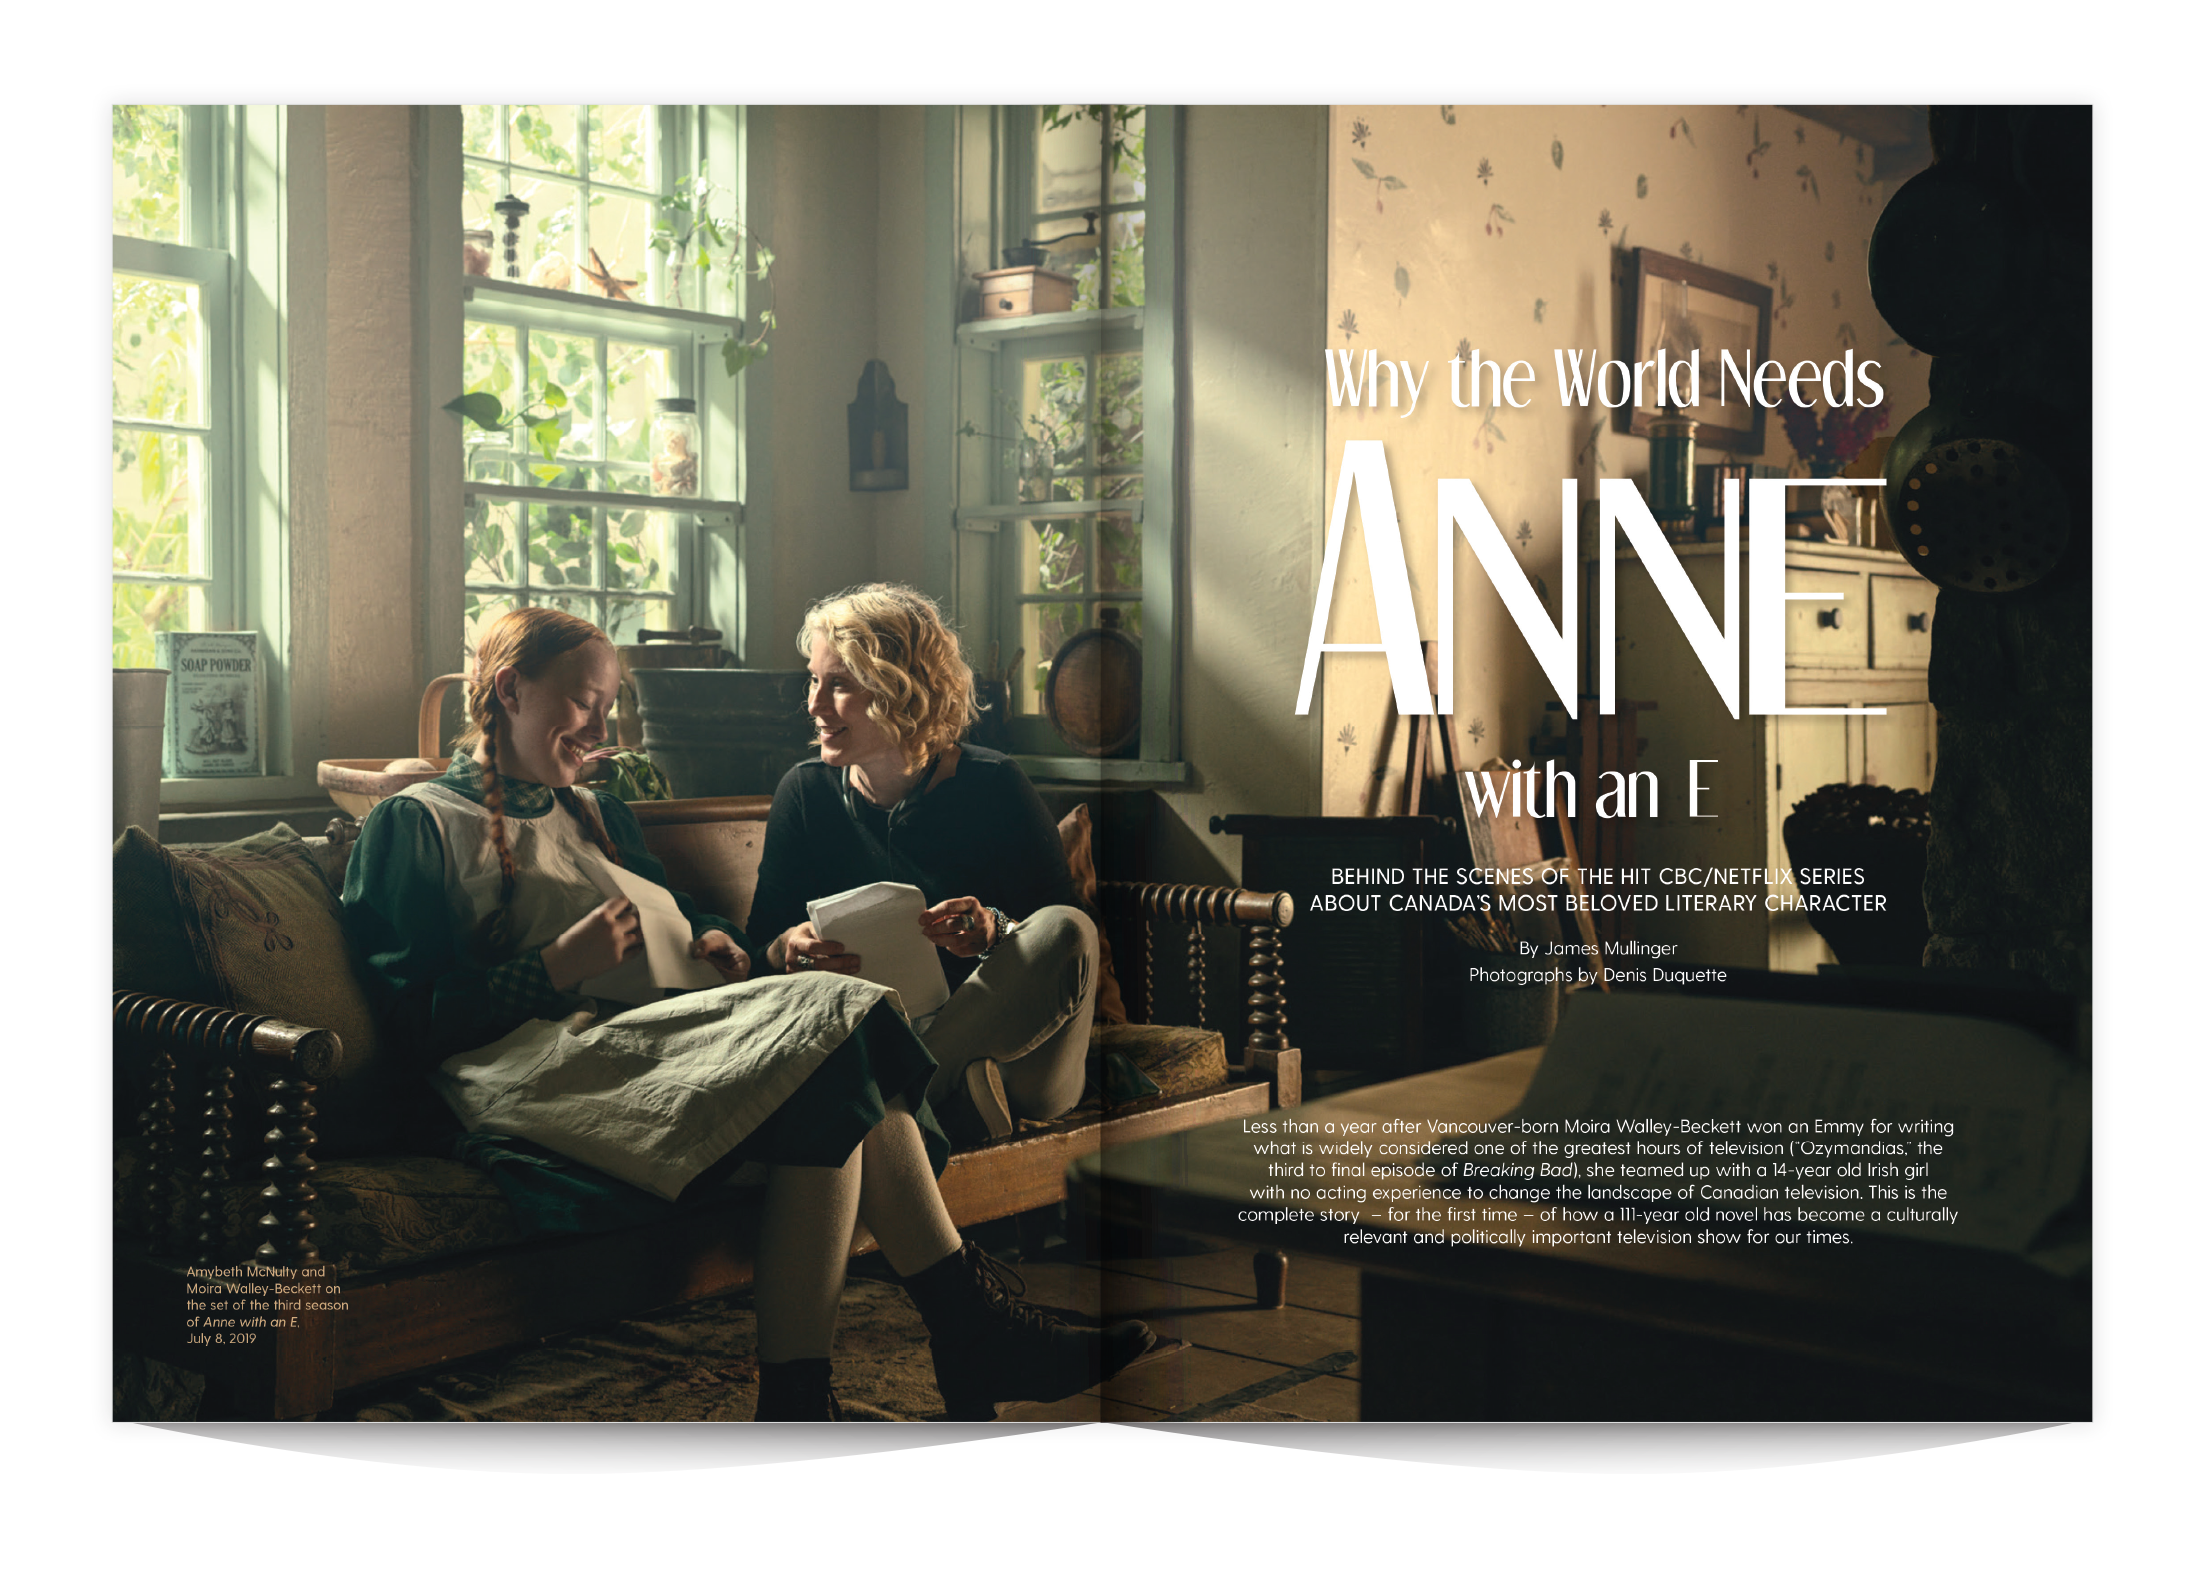 Why the World Needs Anne with an E, for [EDIT] Magazine, Volume 10